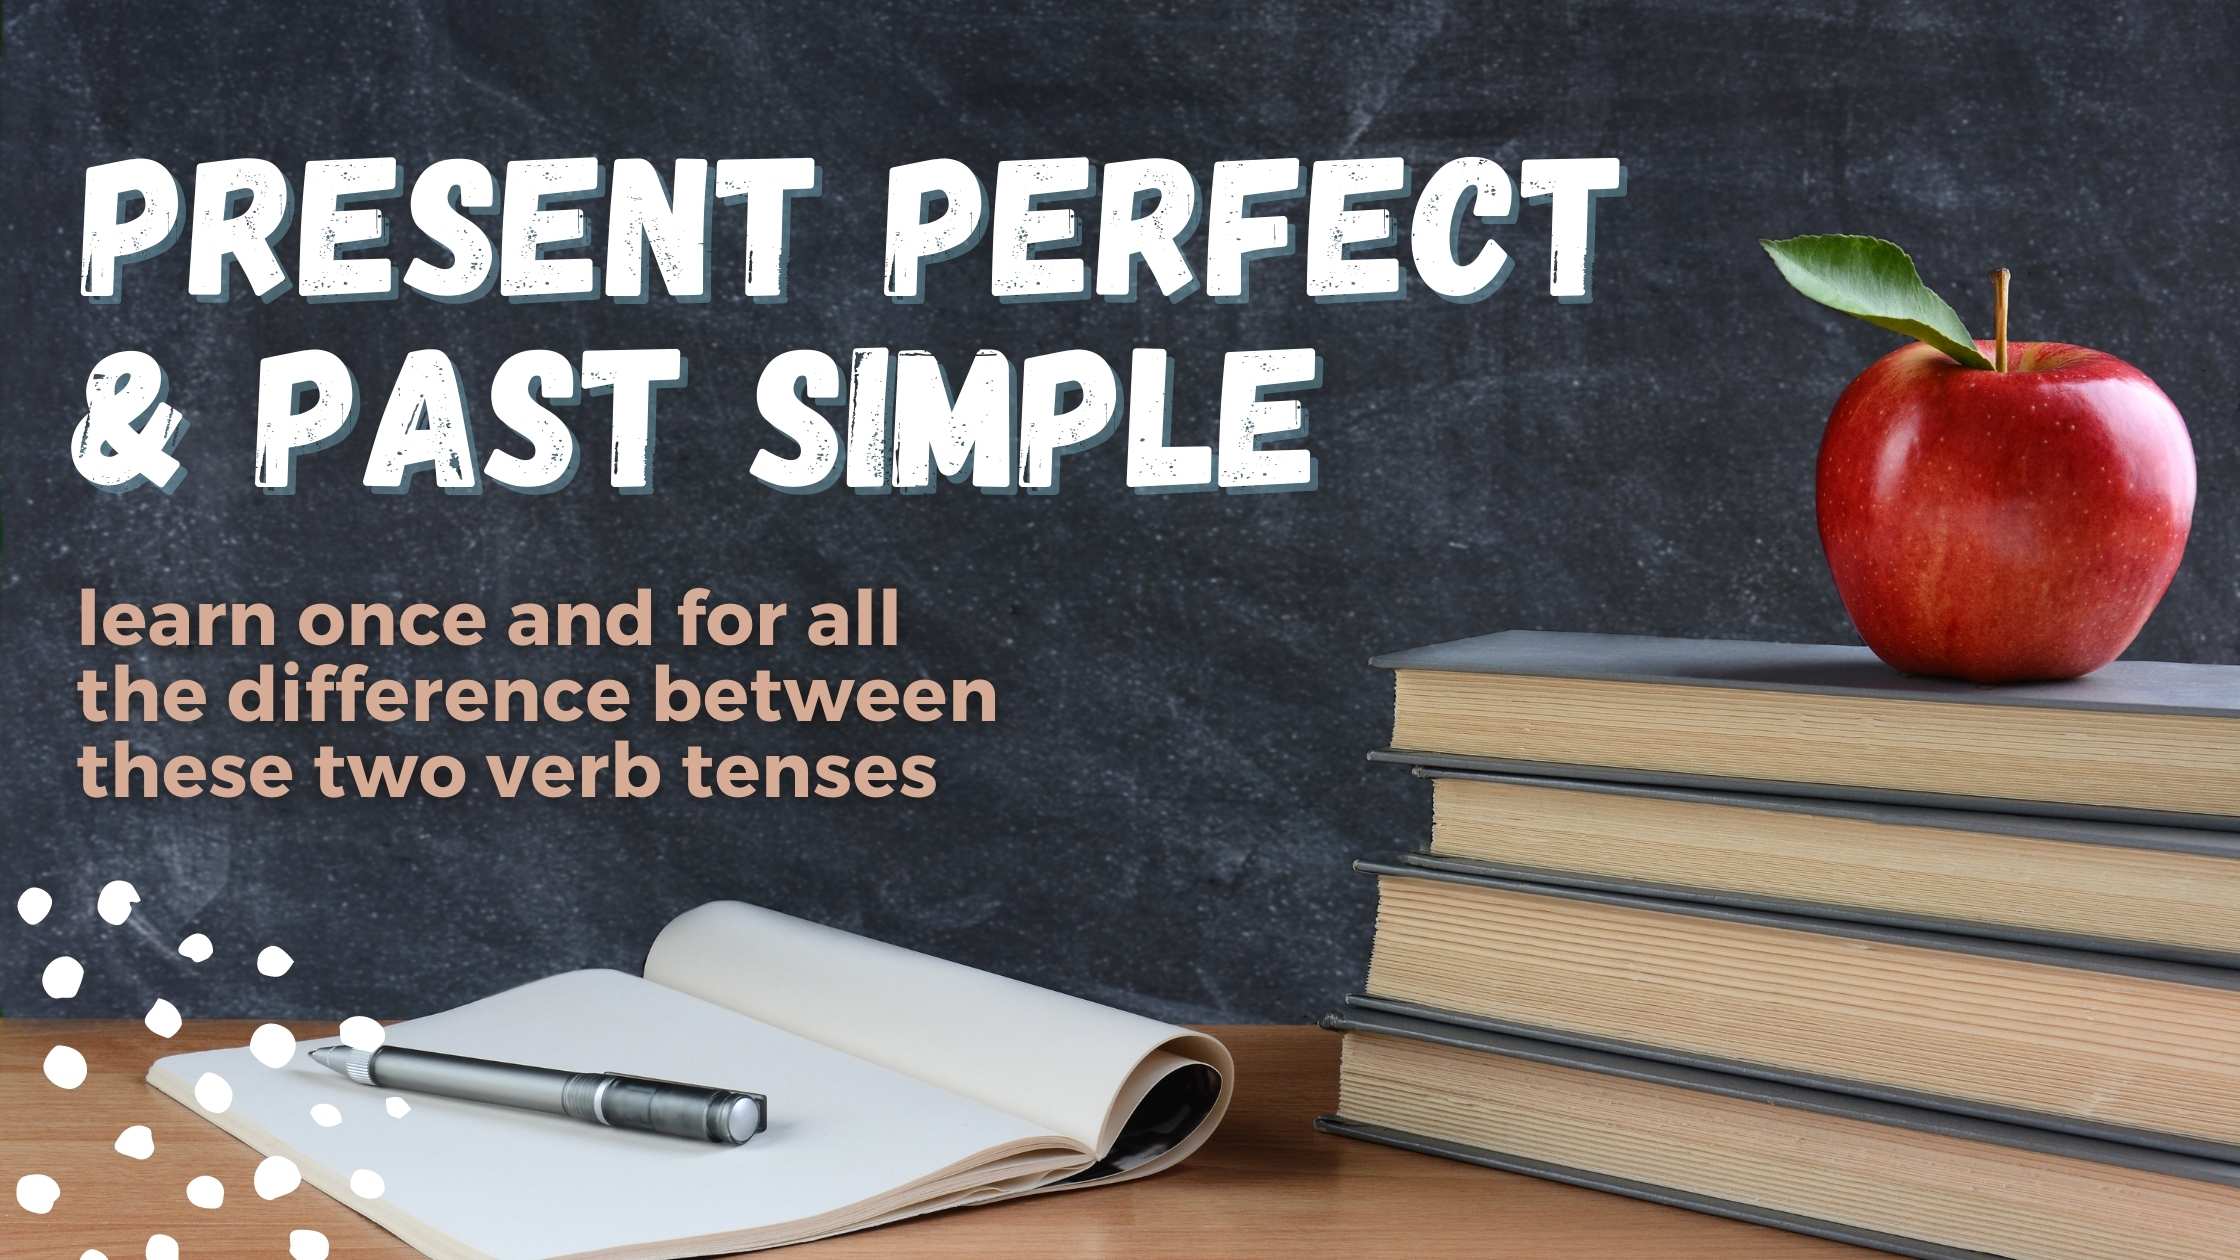 past tense verbs in English, how to use past simple, present perfect in English